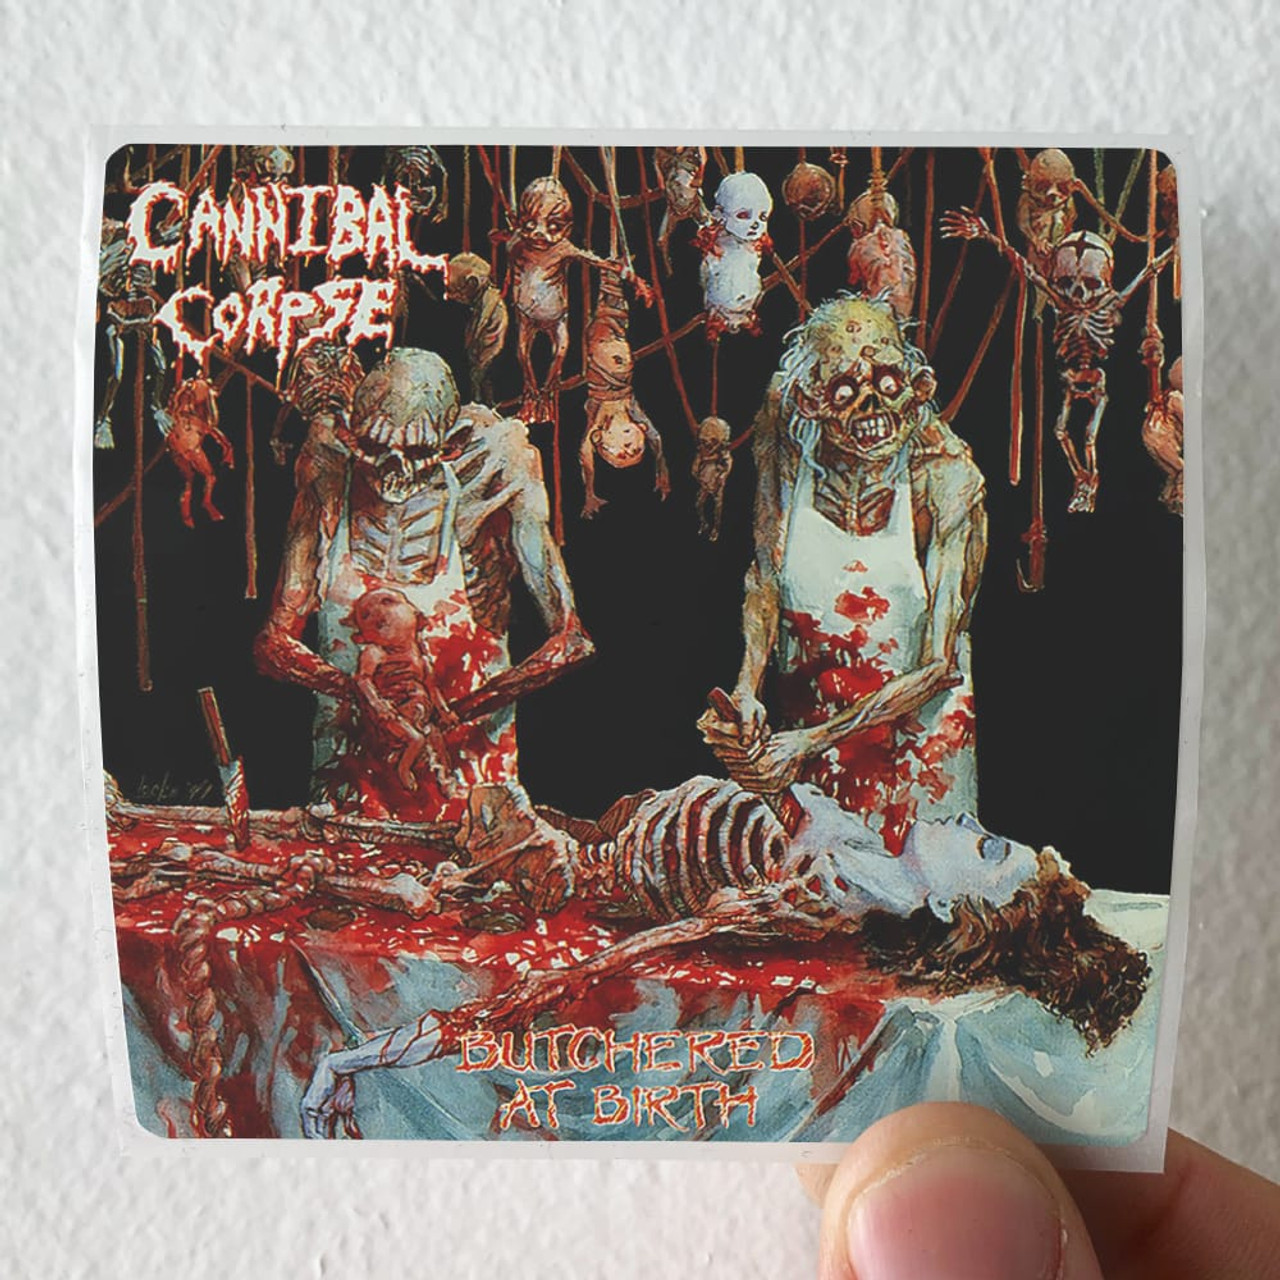 Cannibal Corpse Butchered At Birth Album Cover Sticker